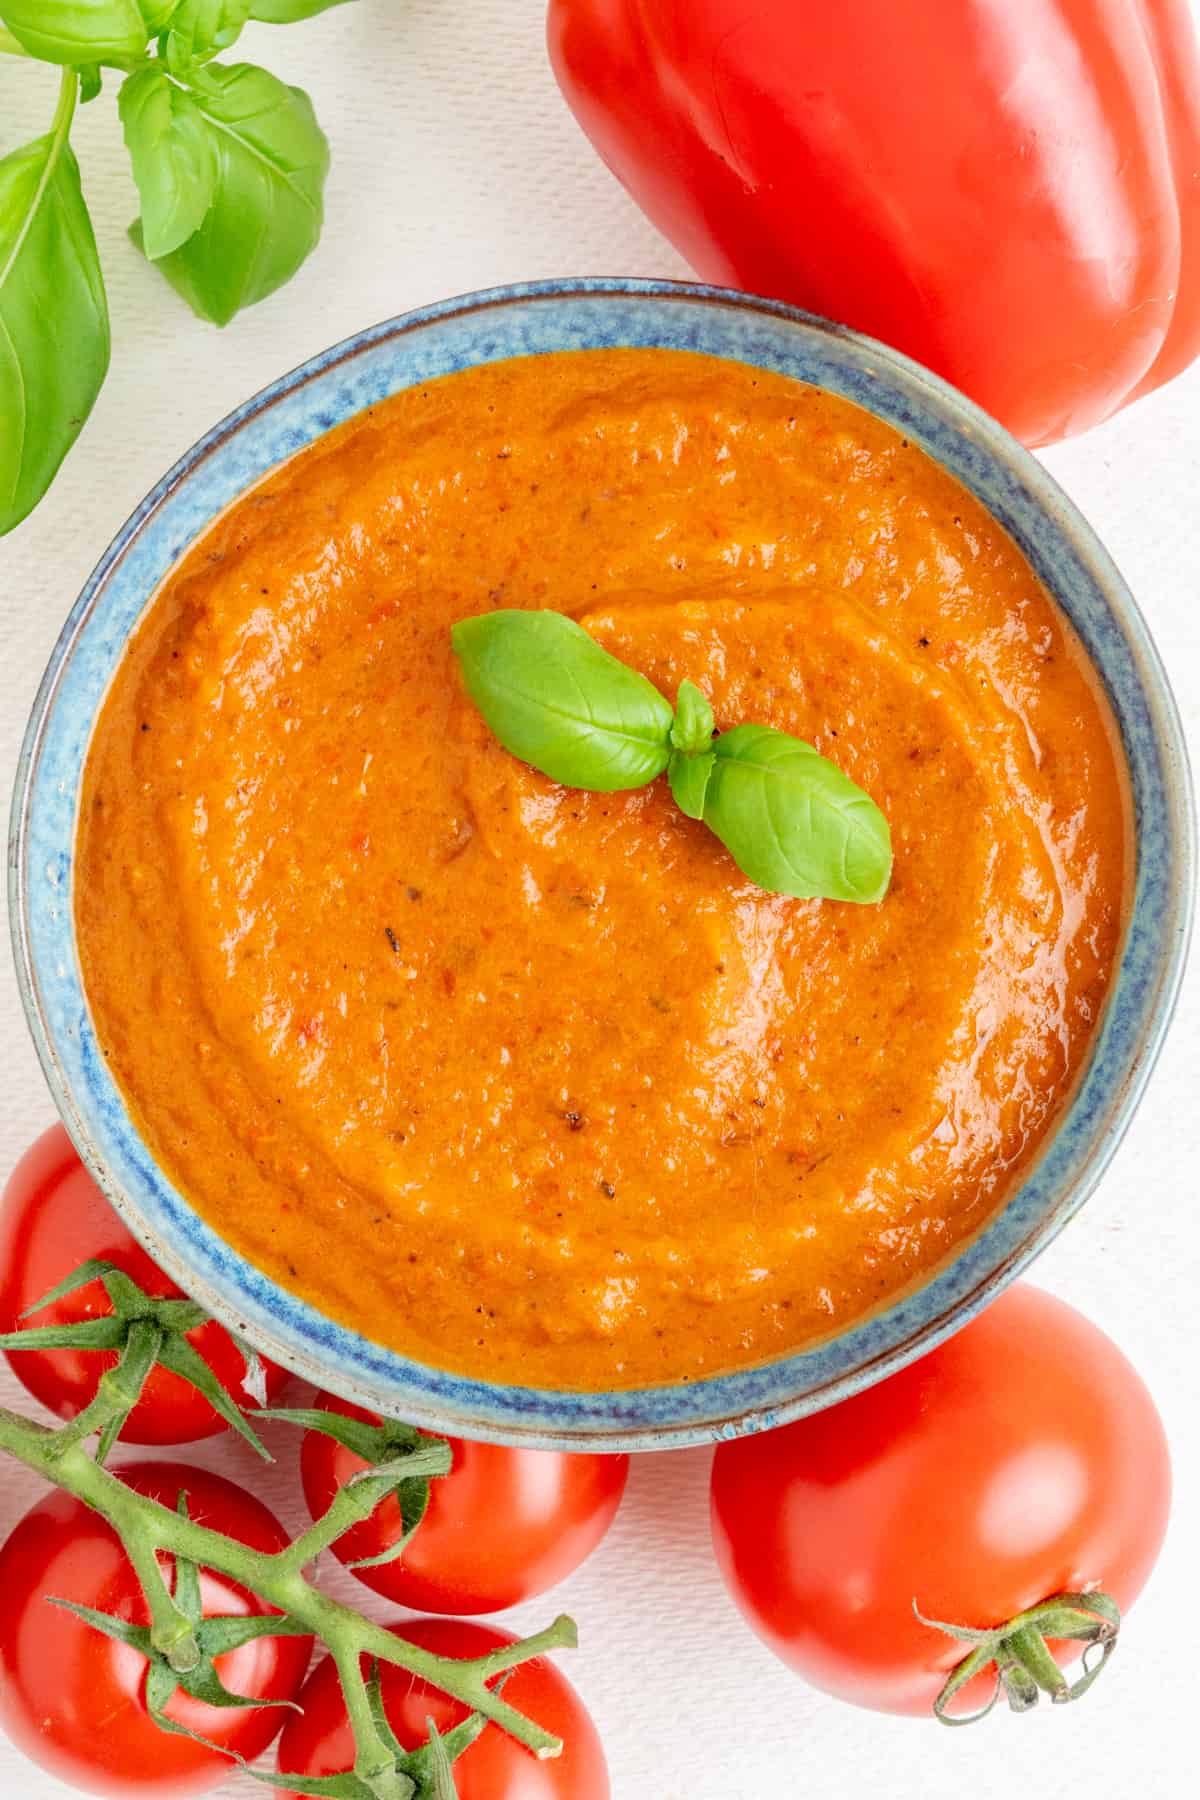 Smooth and thick, orange red sauce in a bowl, topped with fresh basil.